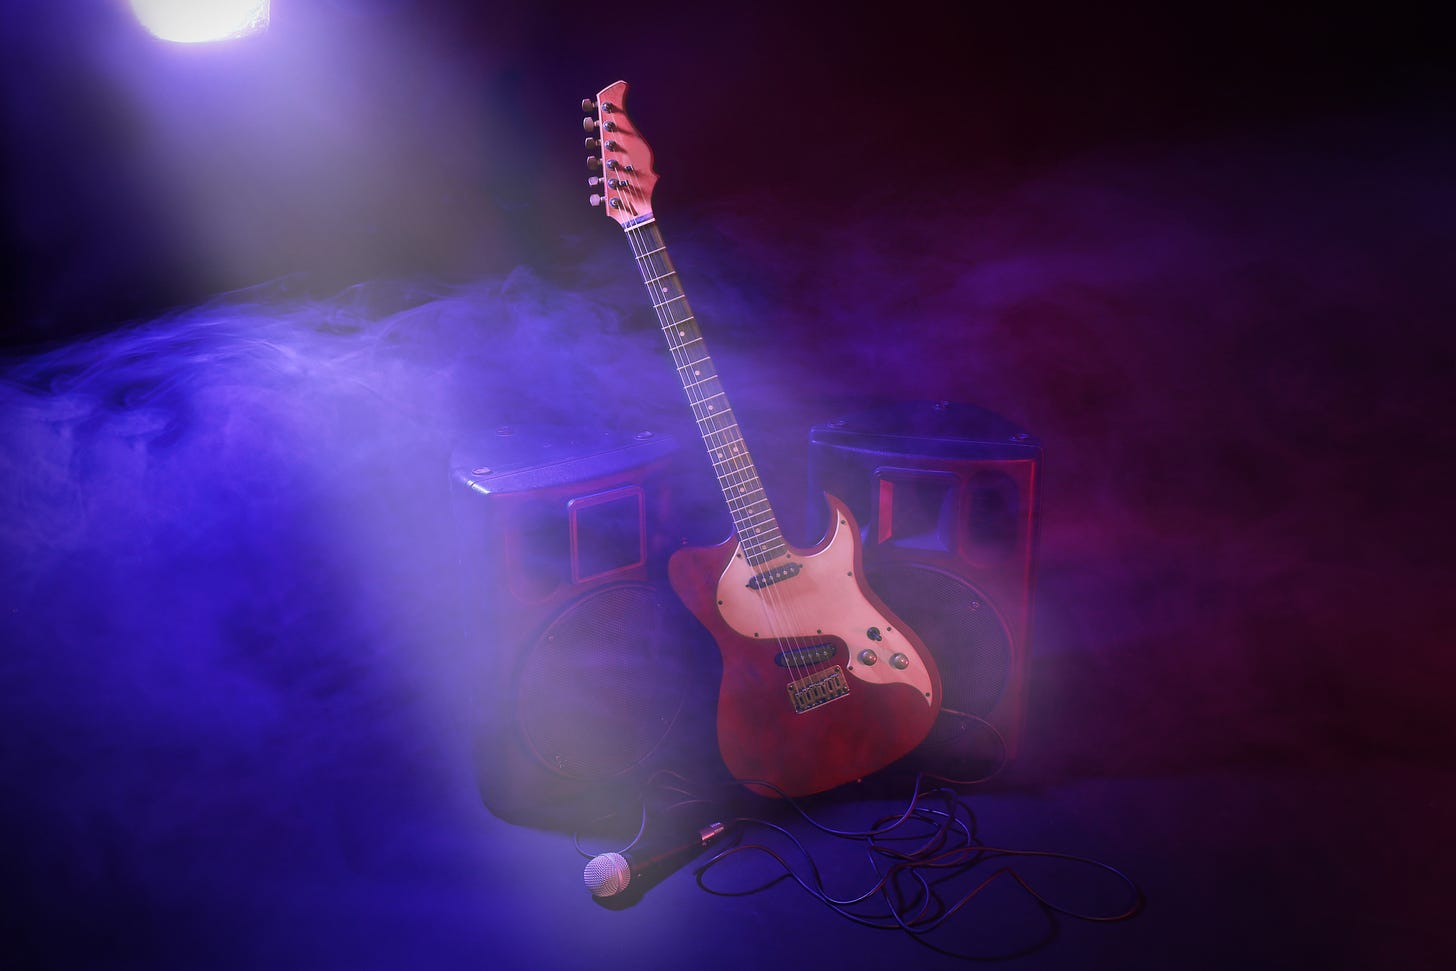 Electric guitar propped against speakers with mic on floor of a dark stage with purple smoke